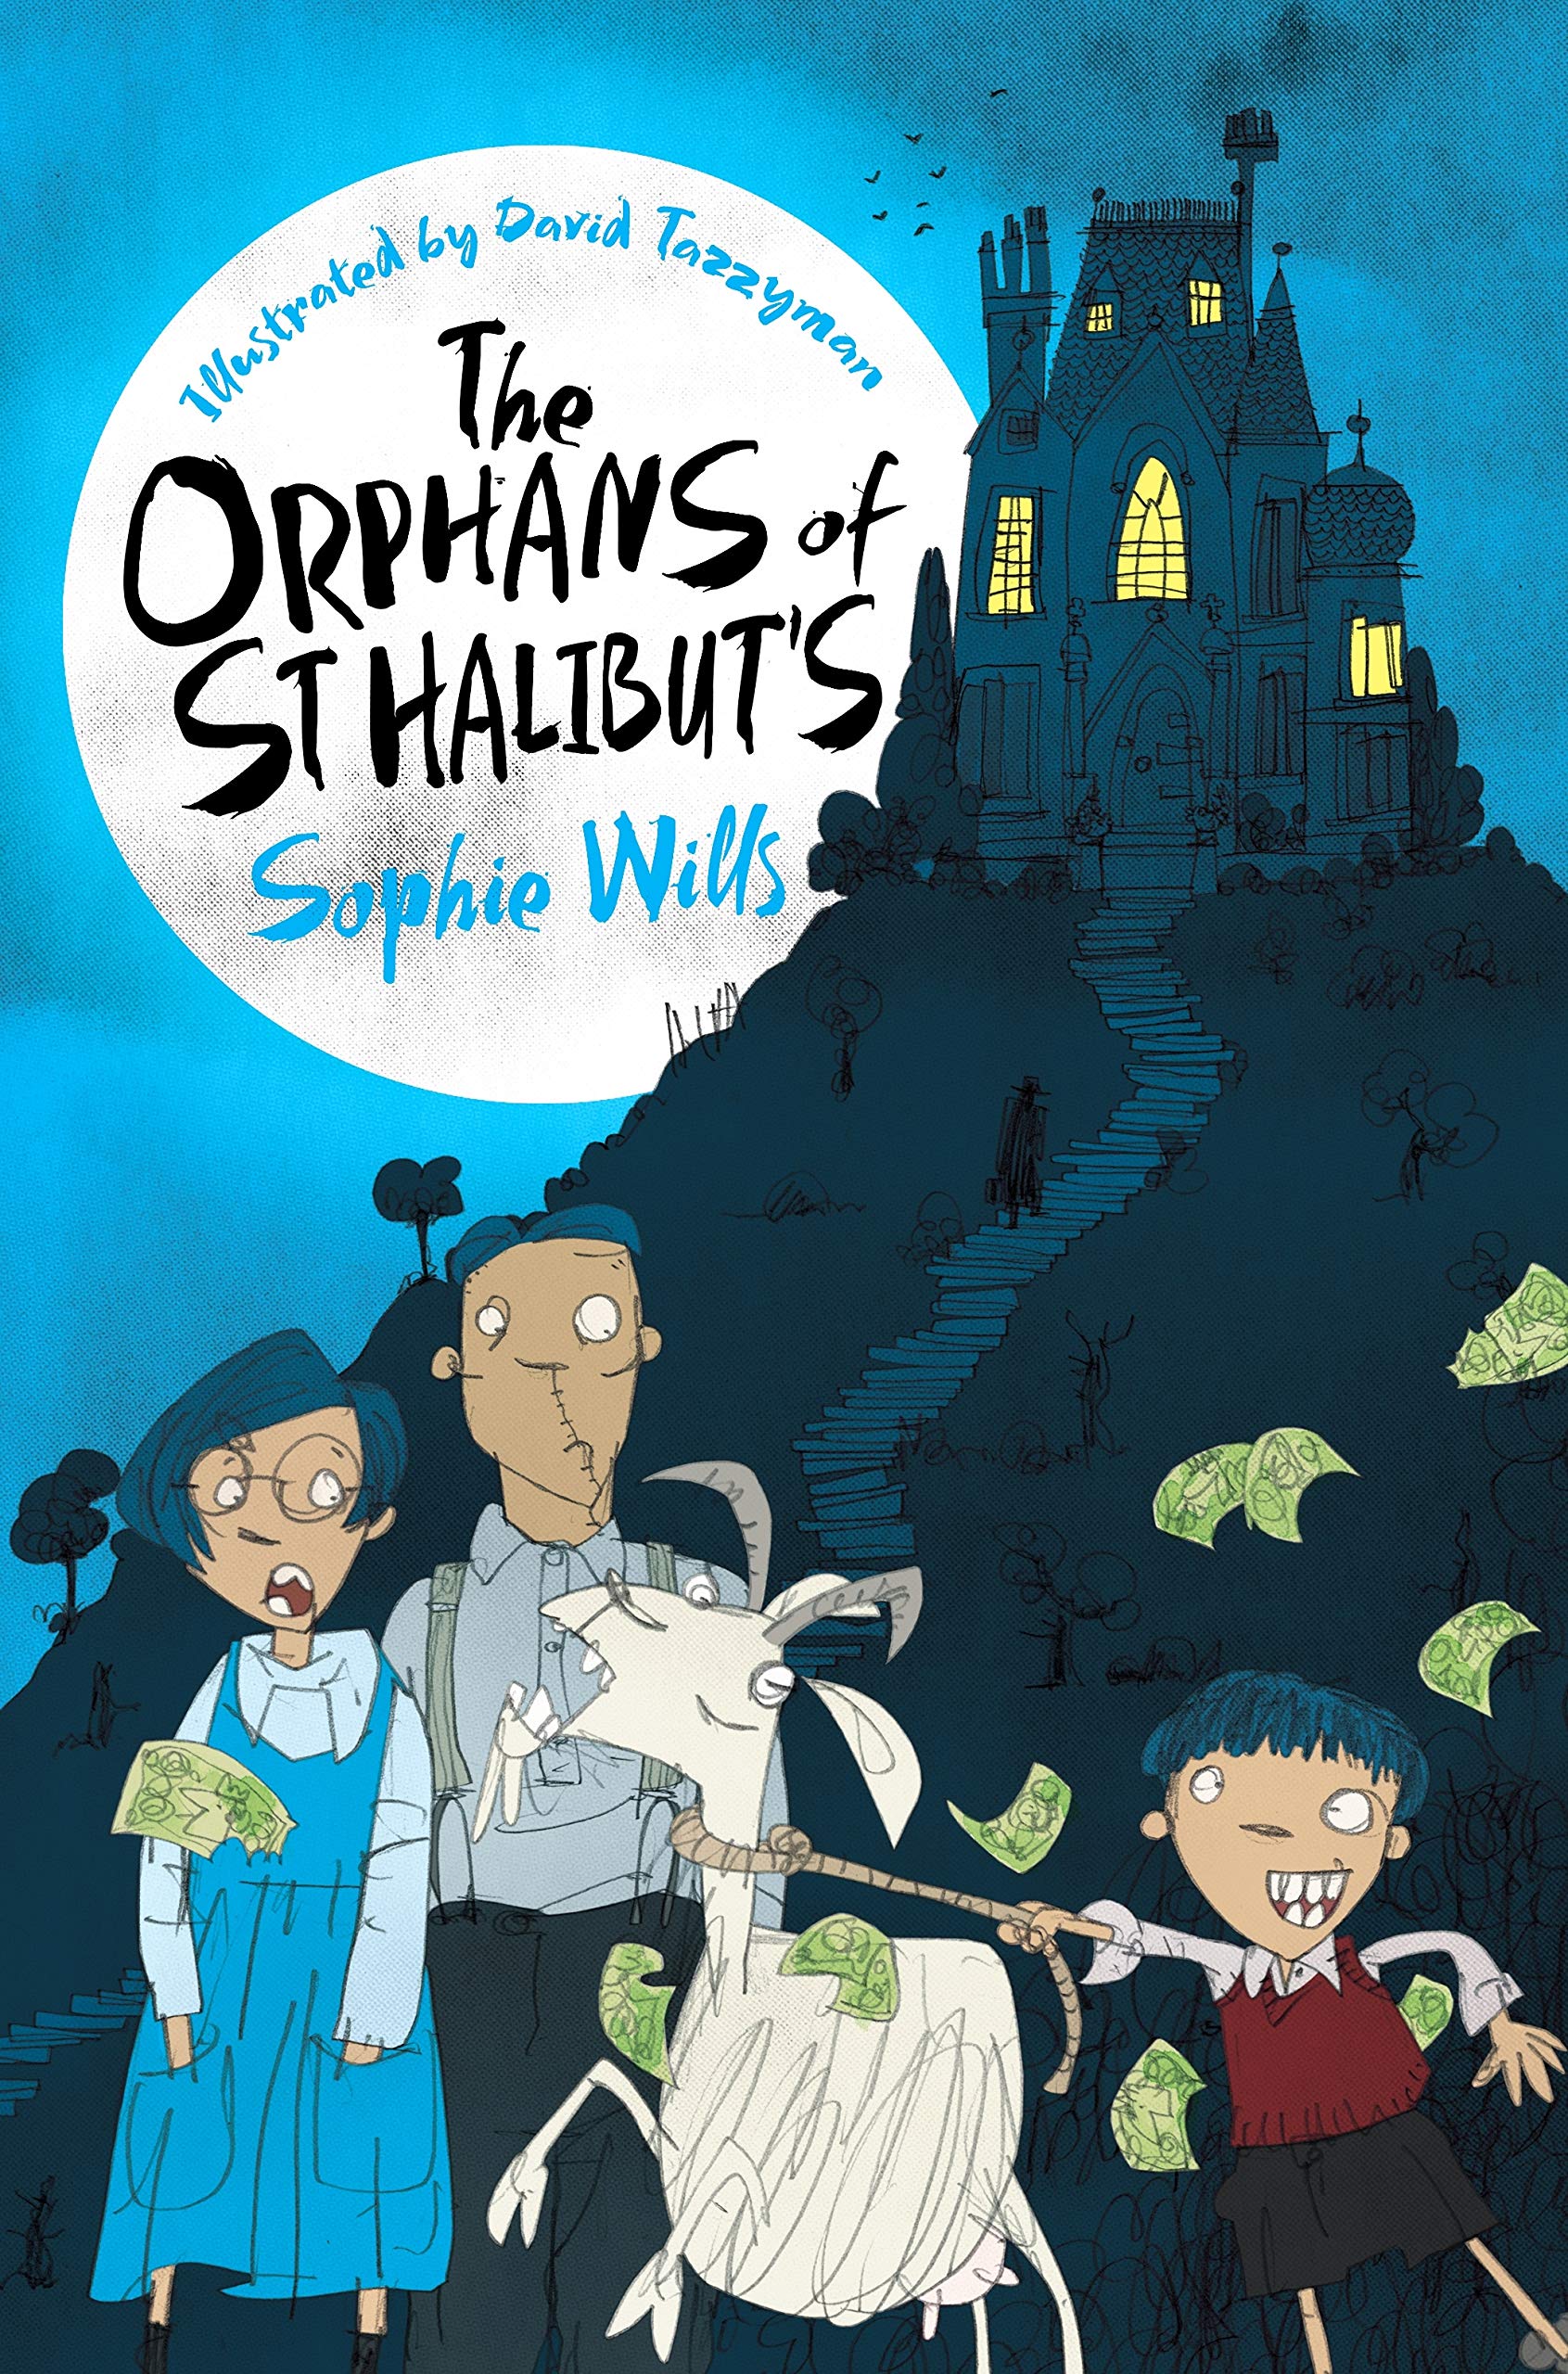 The Orphans of St Halibut&#039;s